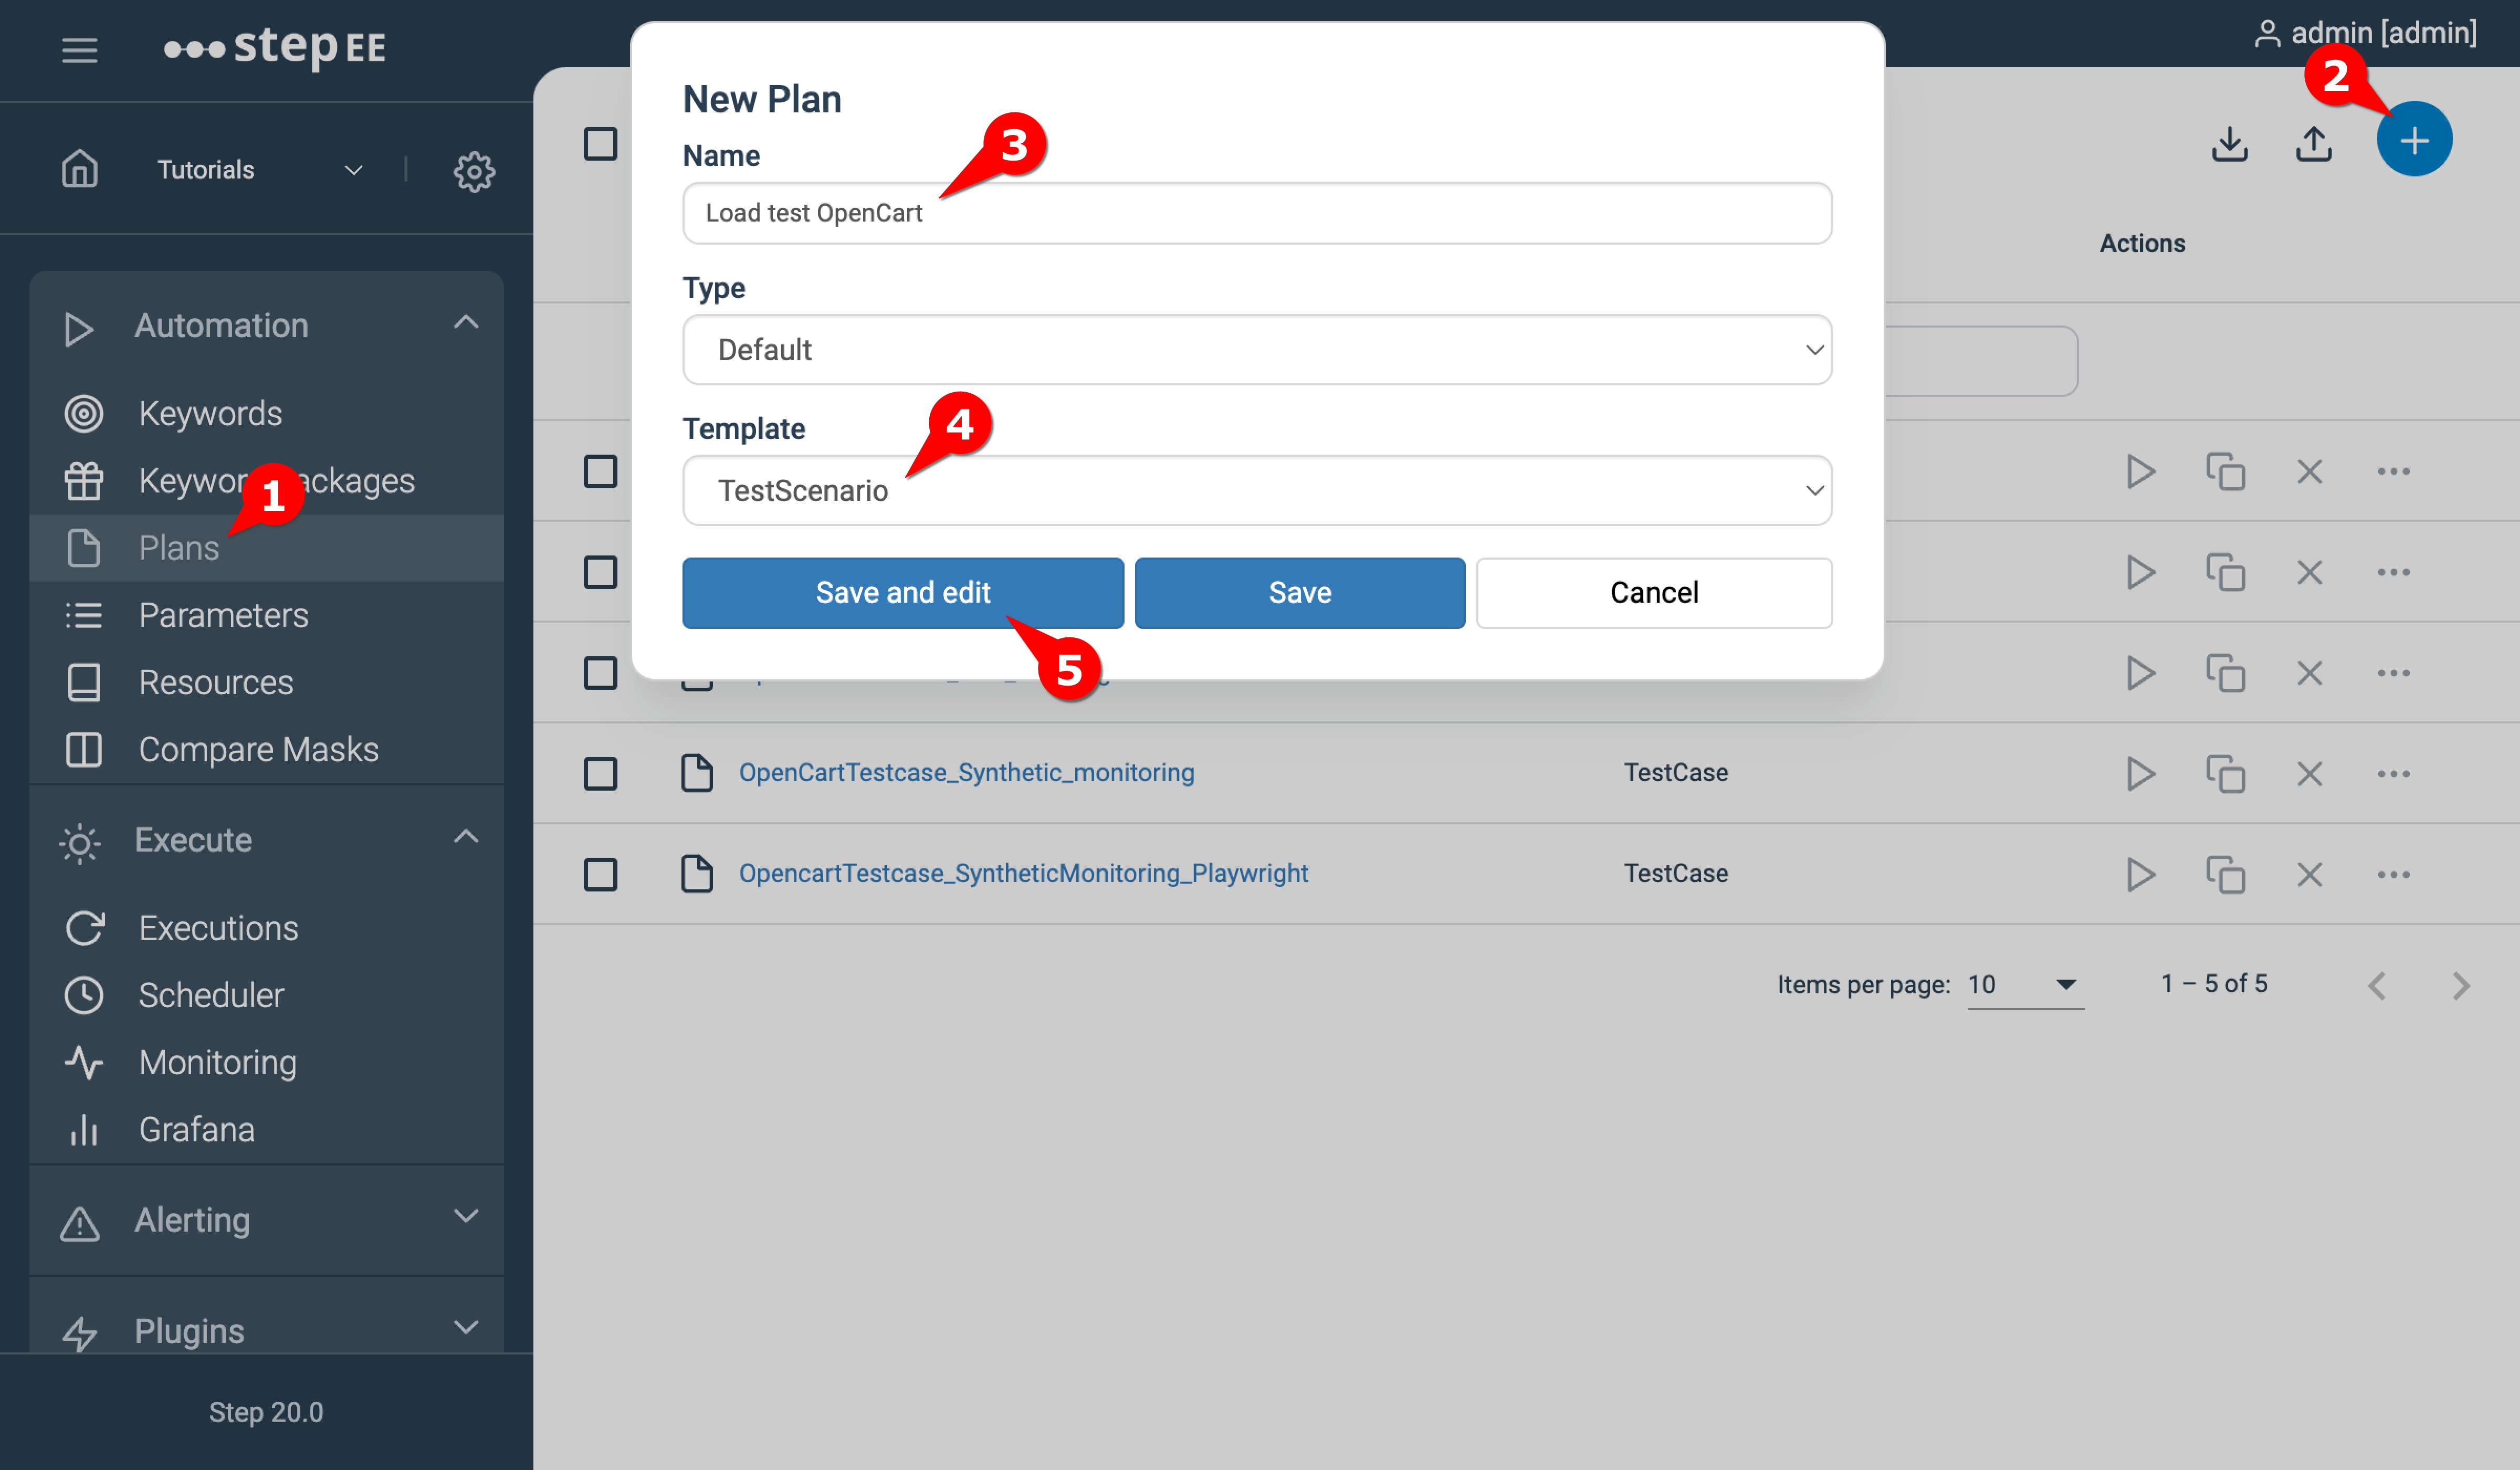 Image showing how to create a new plan using the TestScenario template